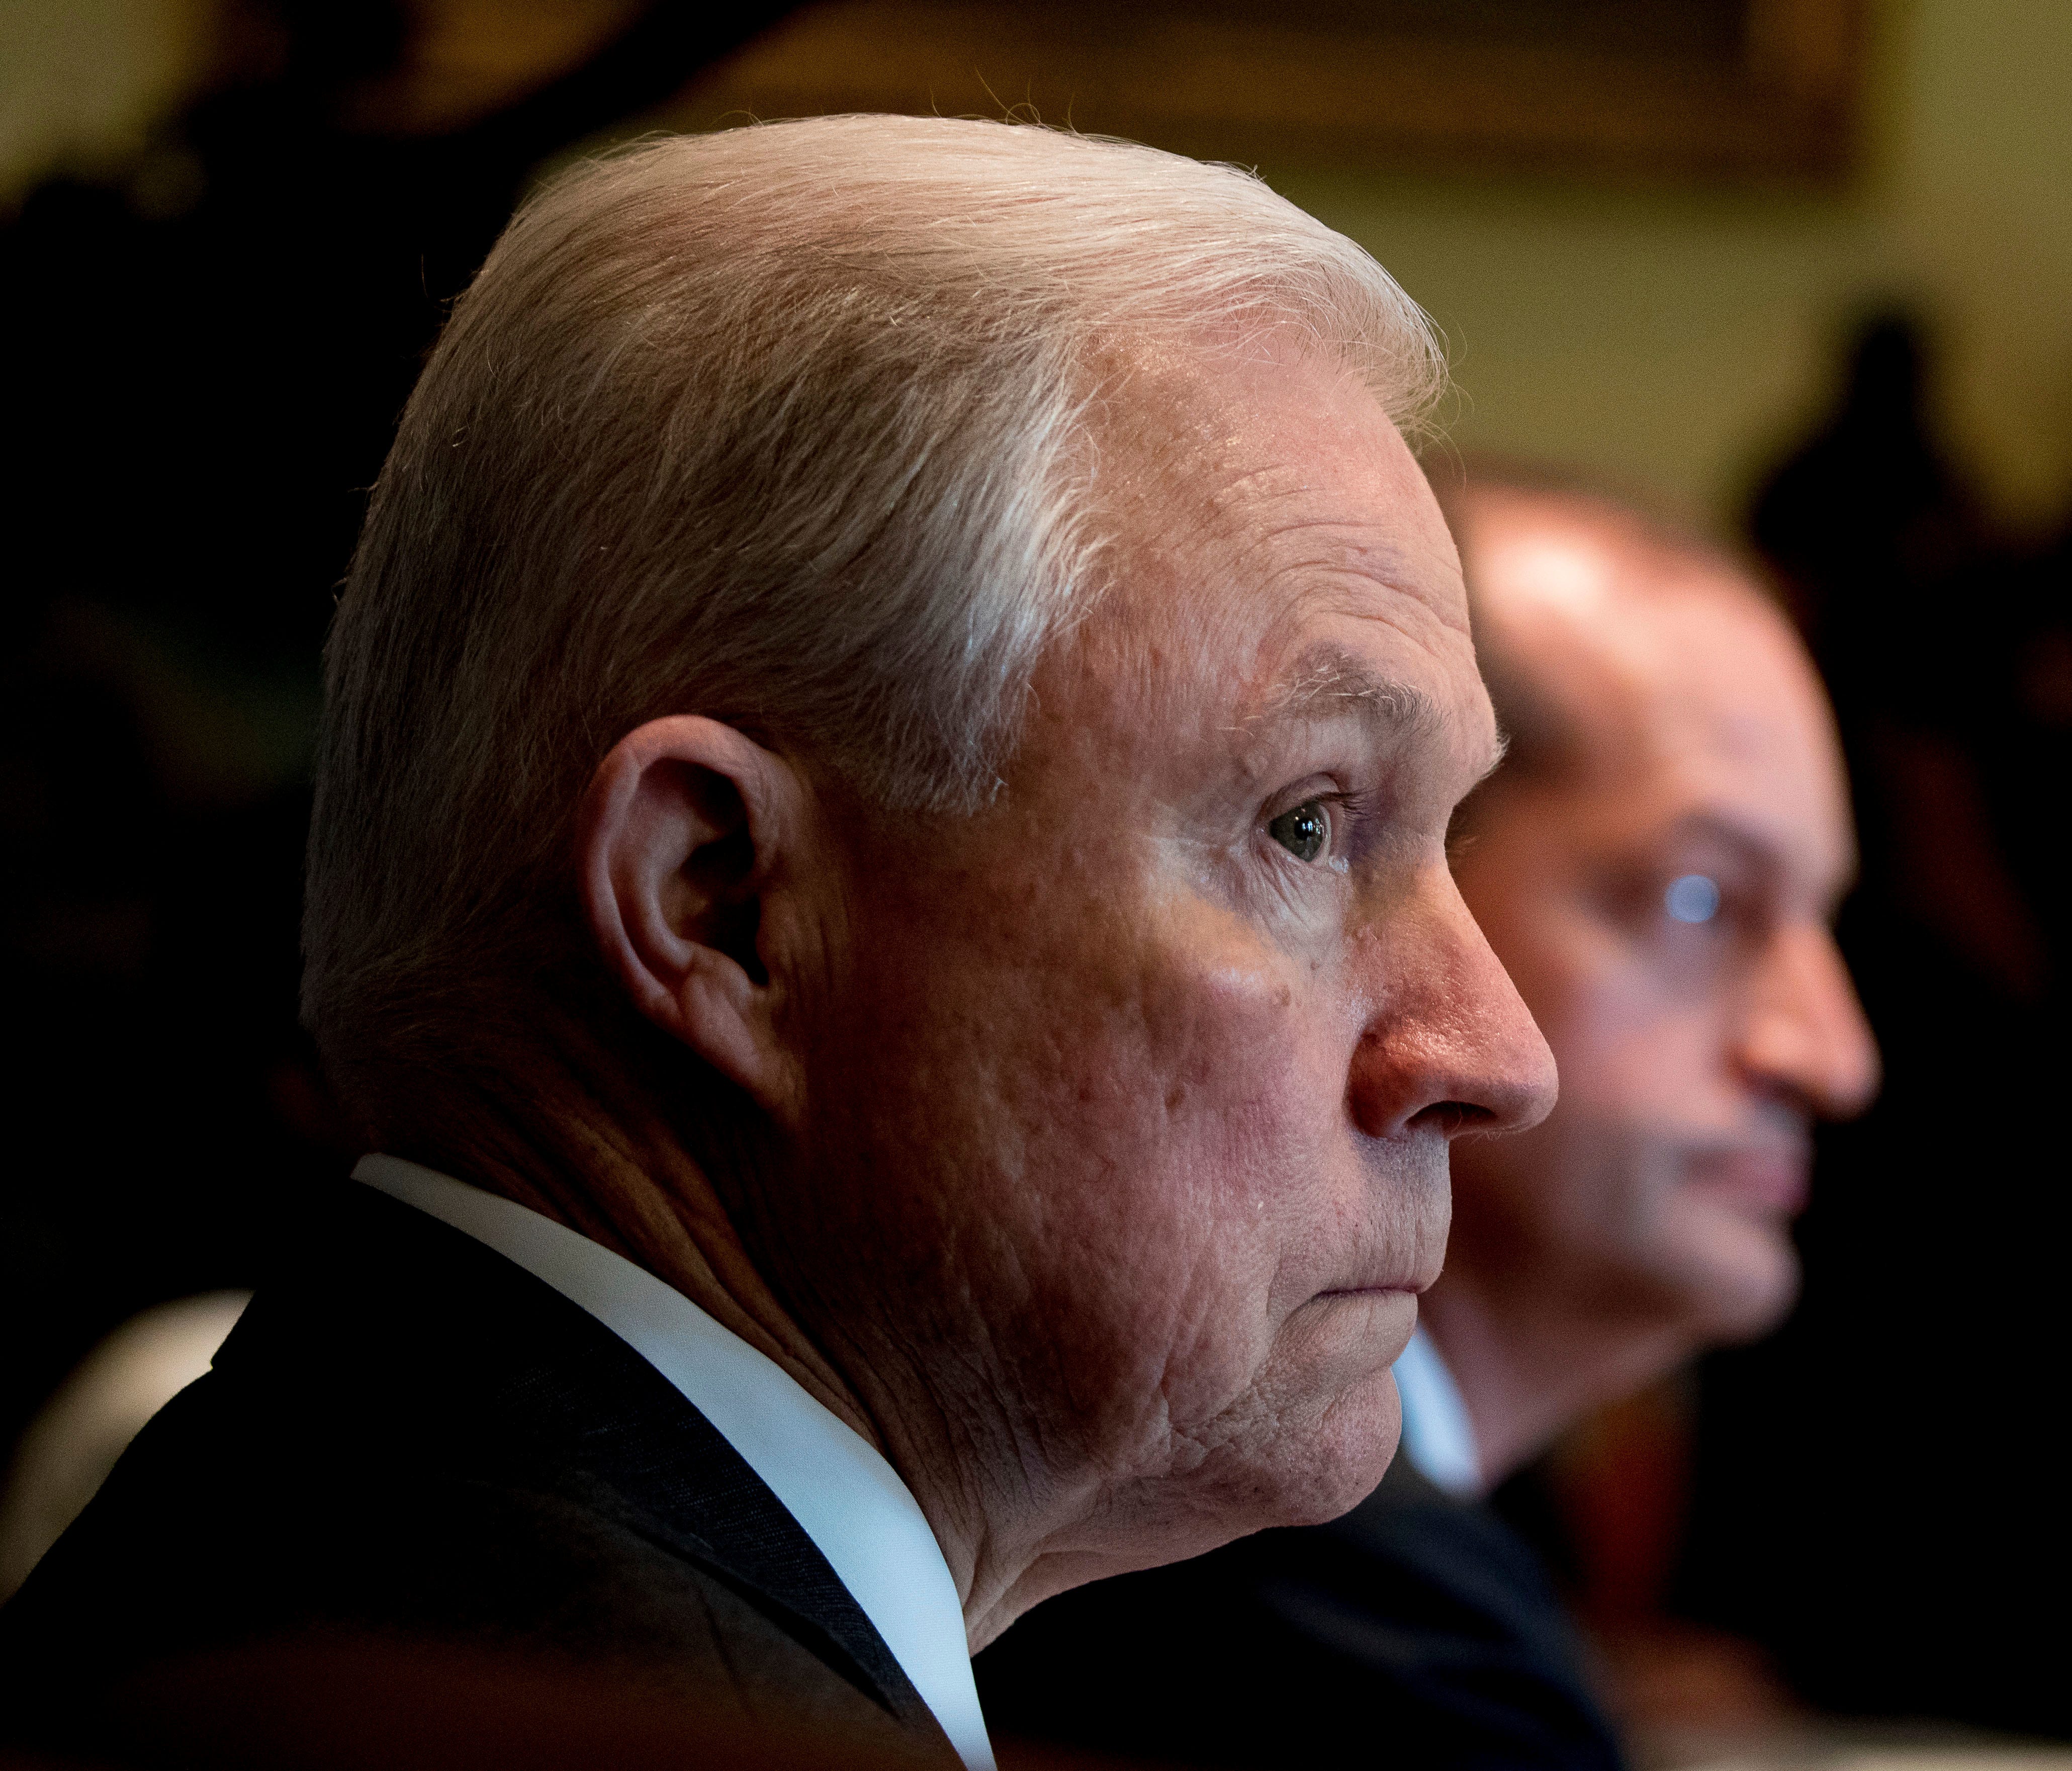 Attorney General Jeff Sessions attends a Cabinet meeting with President Donald Trump, Monday, June 12, 2017, in the Cabinet Room of the White House in Washington.